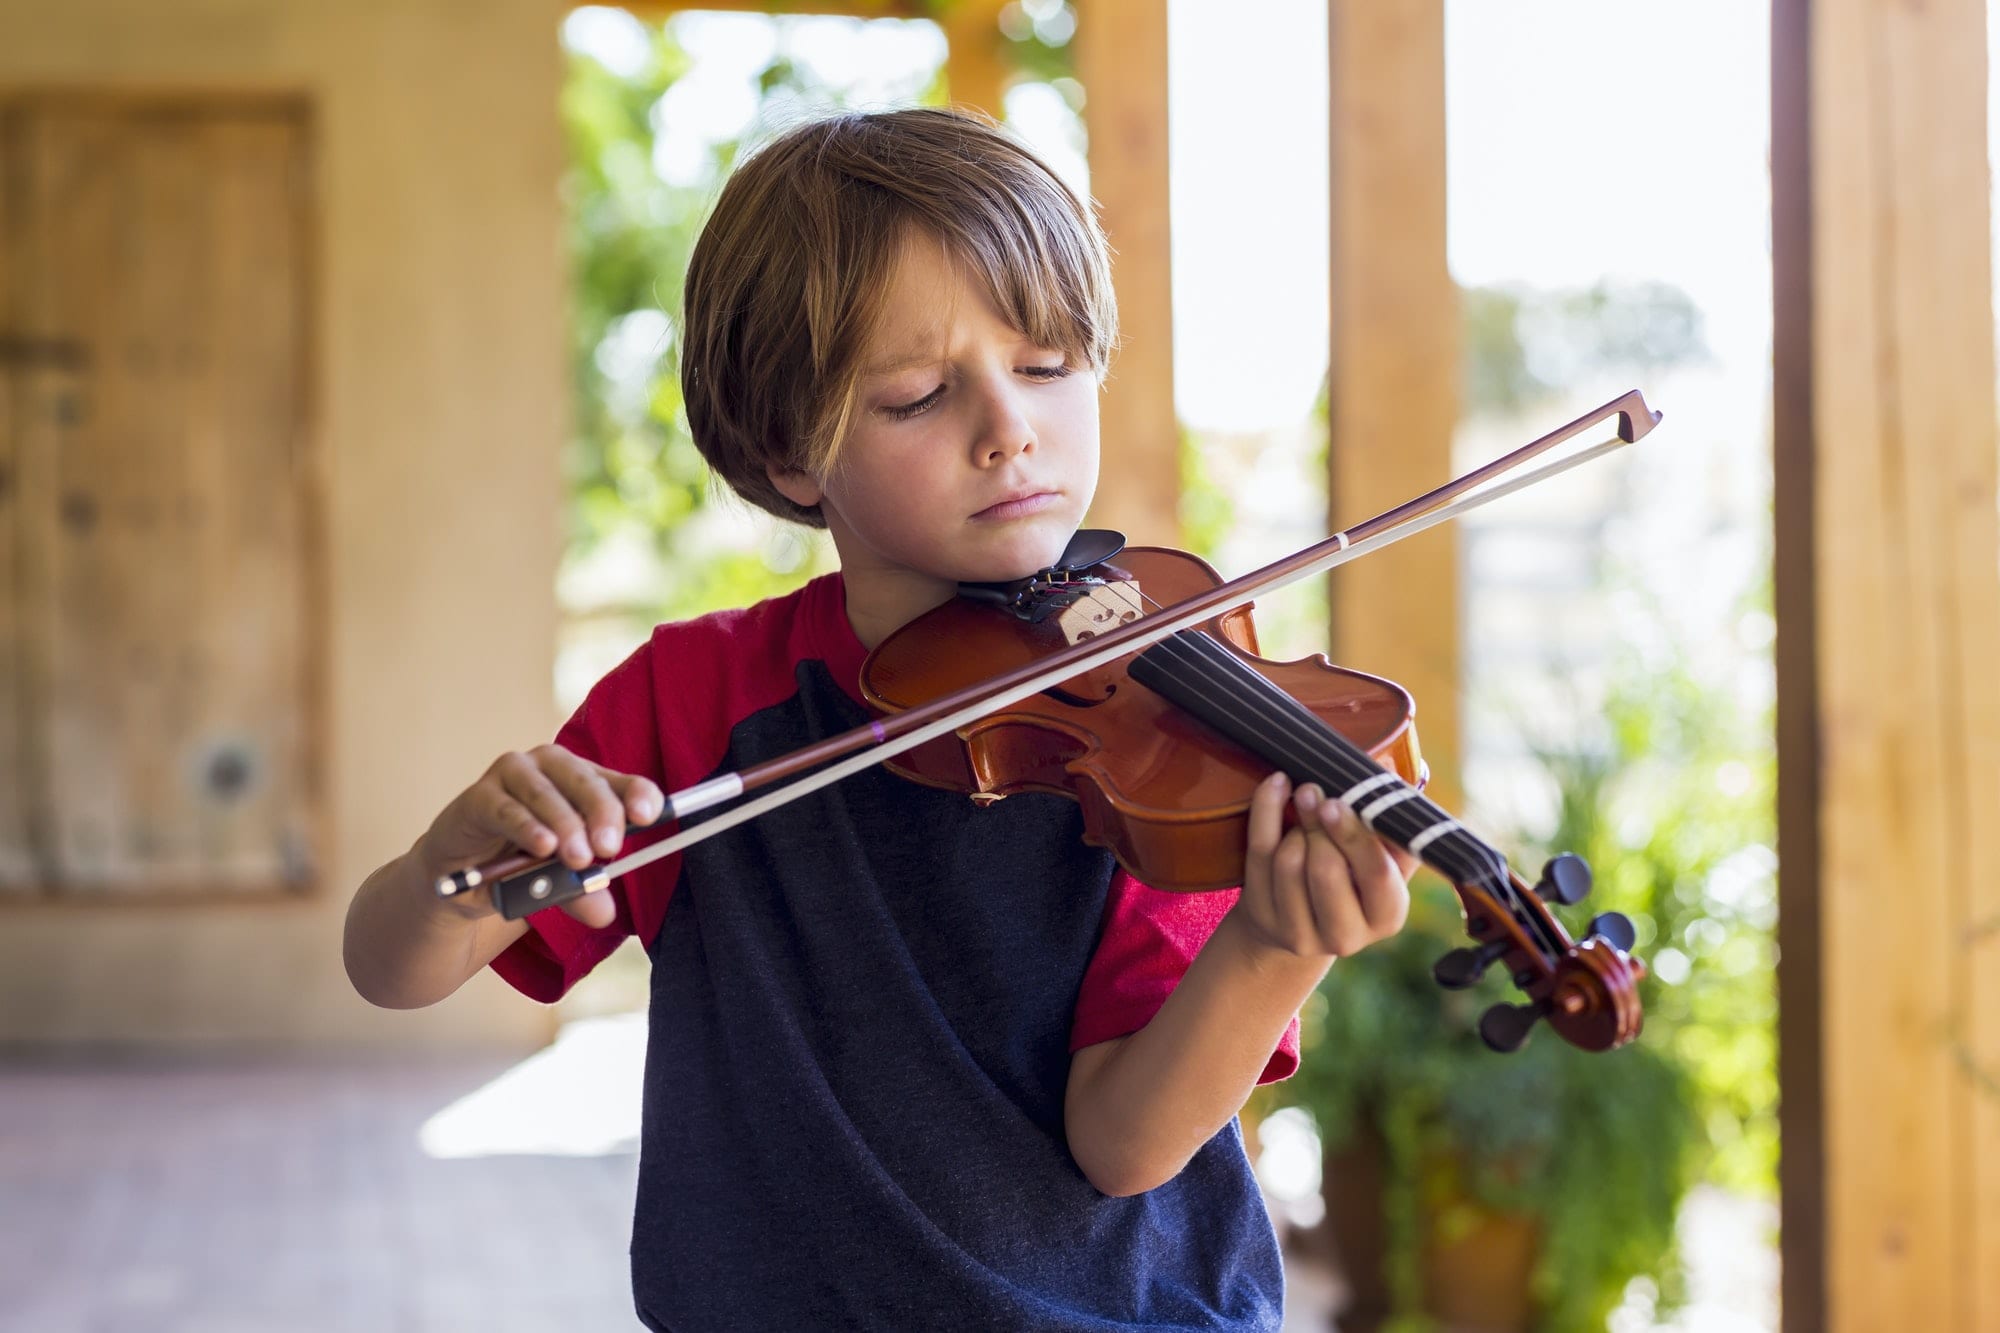 6 year old boy playing violin outside in garden